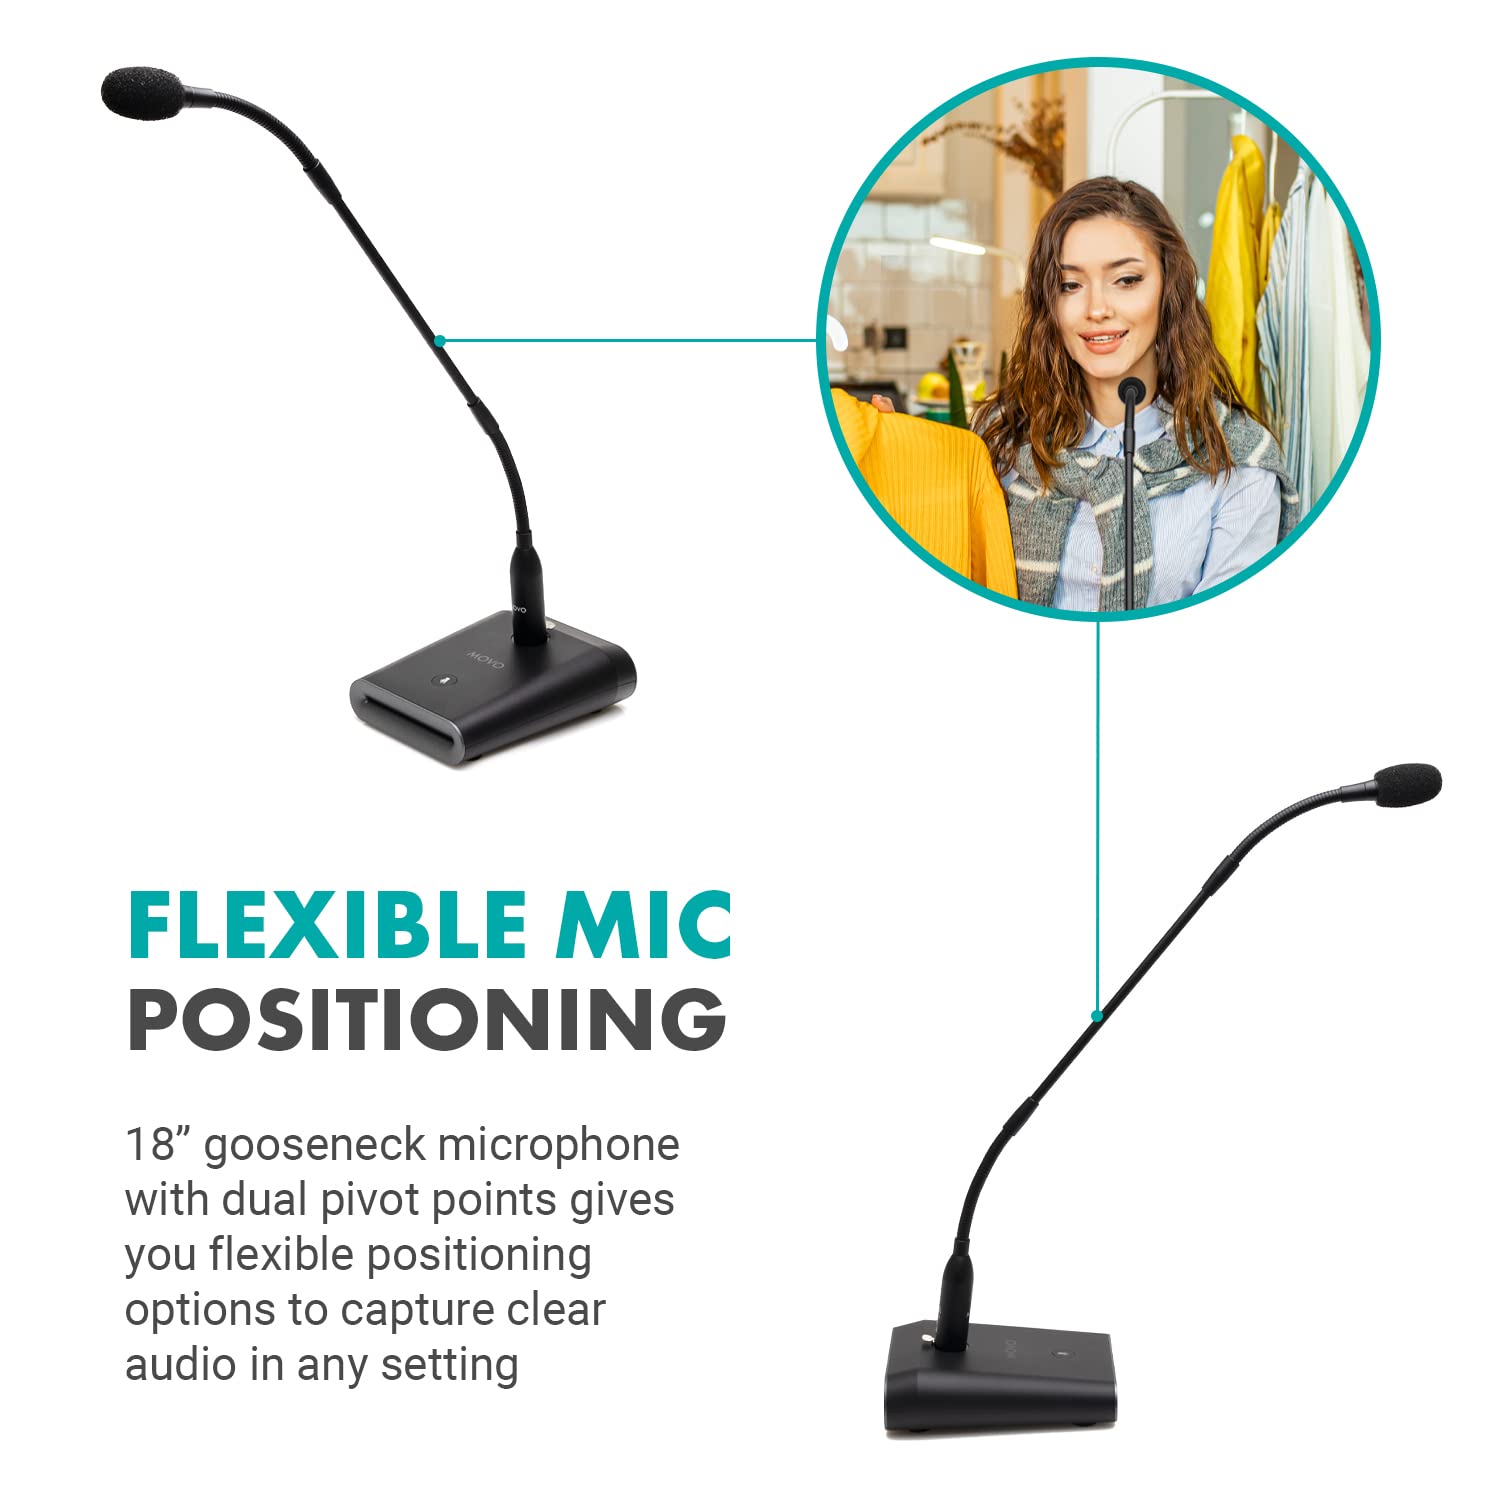 Movo GM-5 Professional 18-inch Gooseneck Microphone with USB Interface Stand, One-Touch Mute- USB Podium Microphone with Stand for Conferencing, Live Events, Streaming - USB Computer Mic for Mac, PC  - Like New